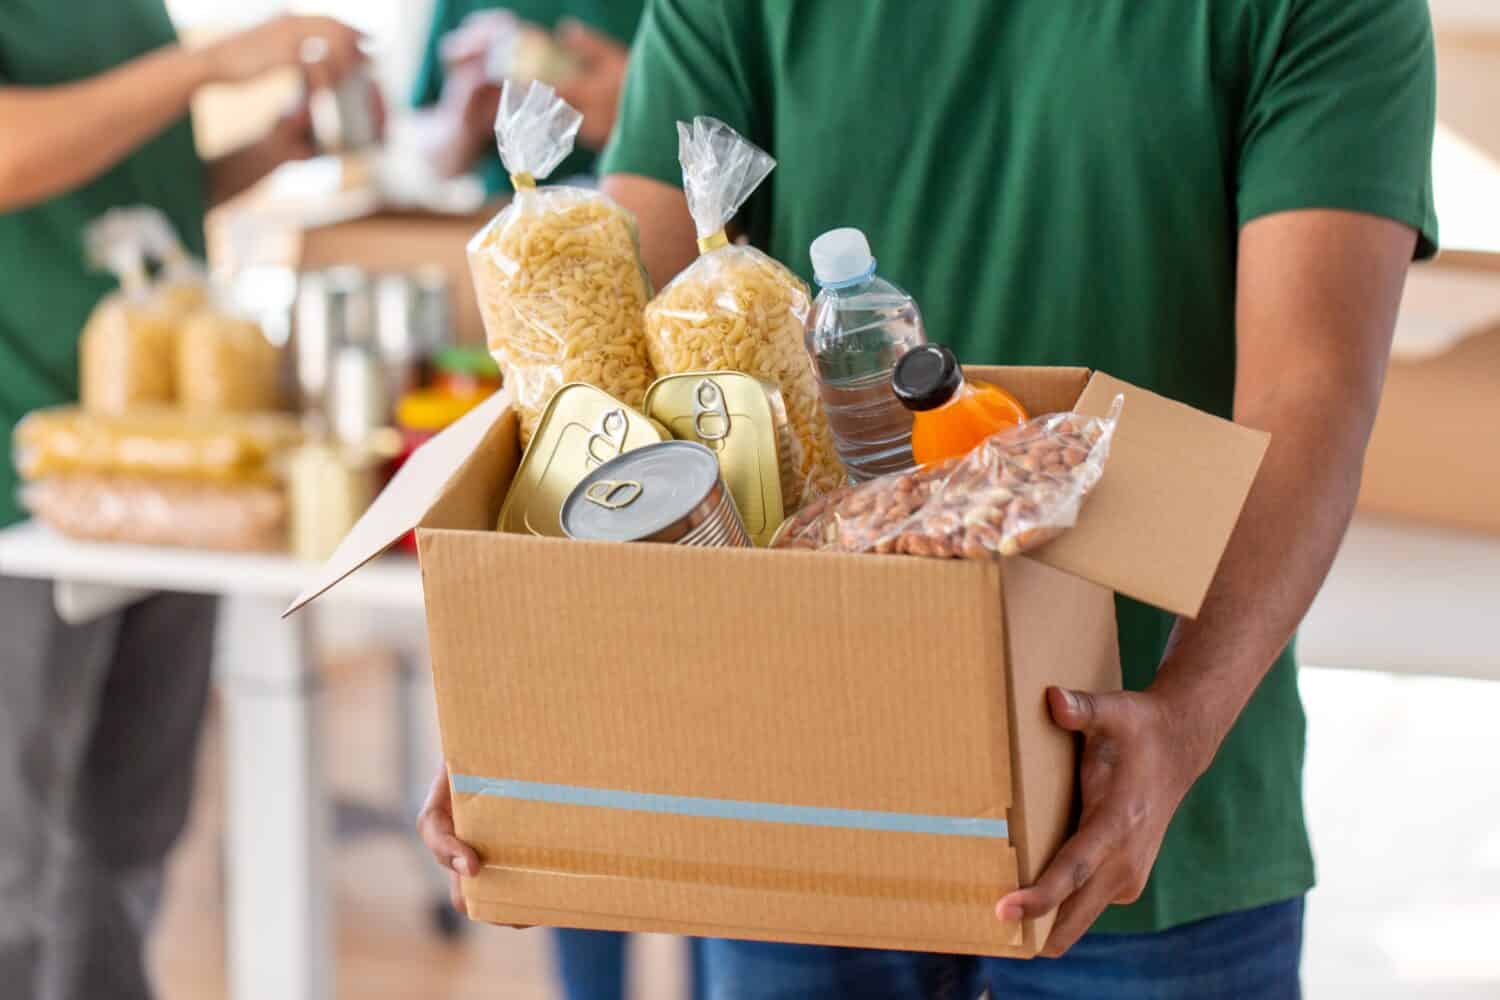 charity, donation and volunteering concept - close up of male volunteer's hands holding box with food over group of people at distribution or refugee assistance center